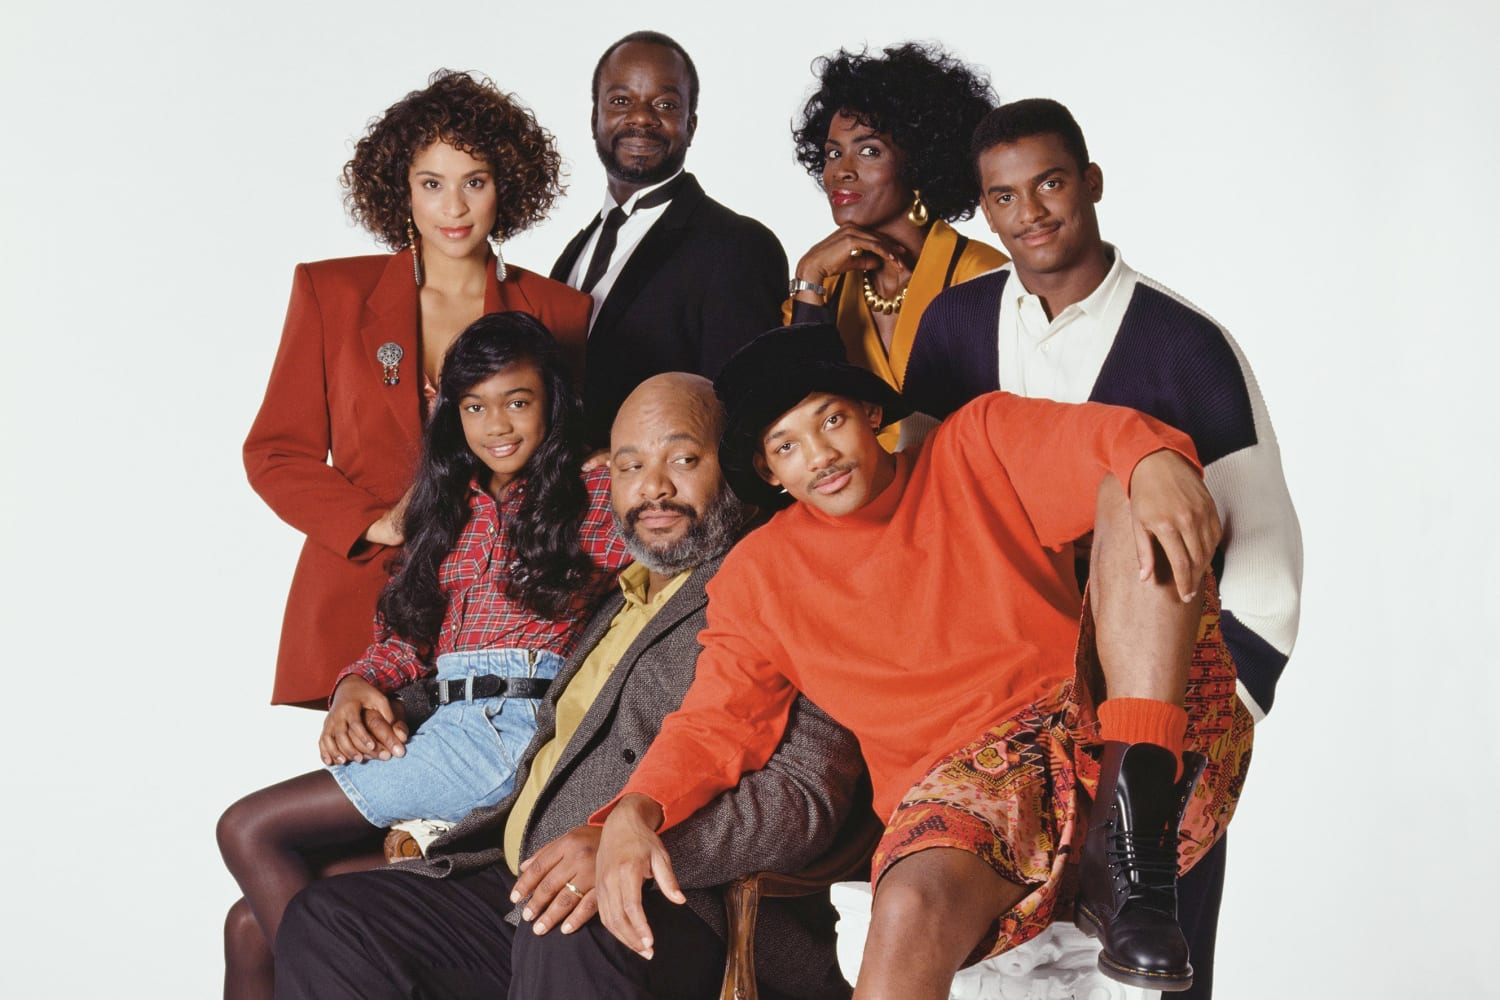 7 things we learned on the 'The Fresh Prince of Bel-Air' reunion